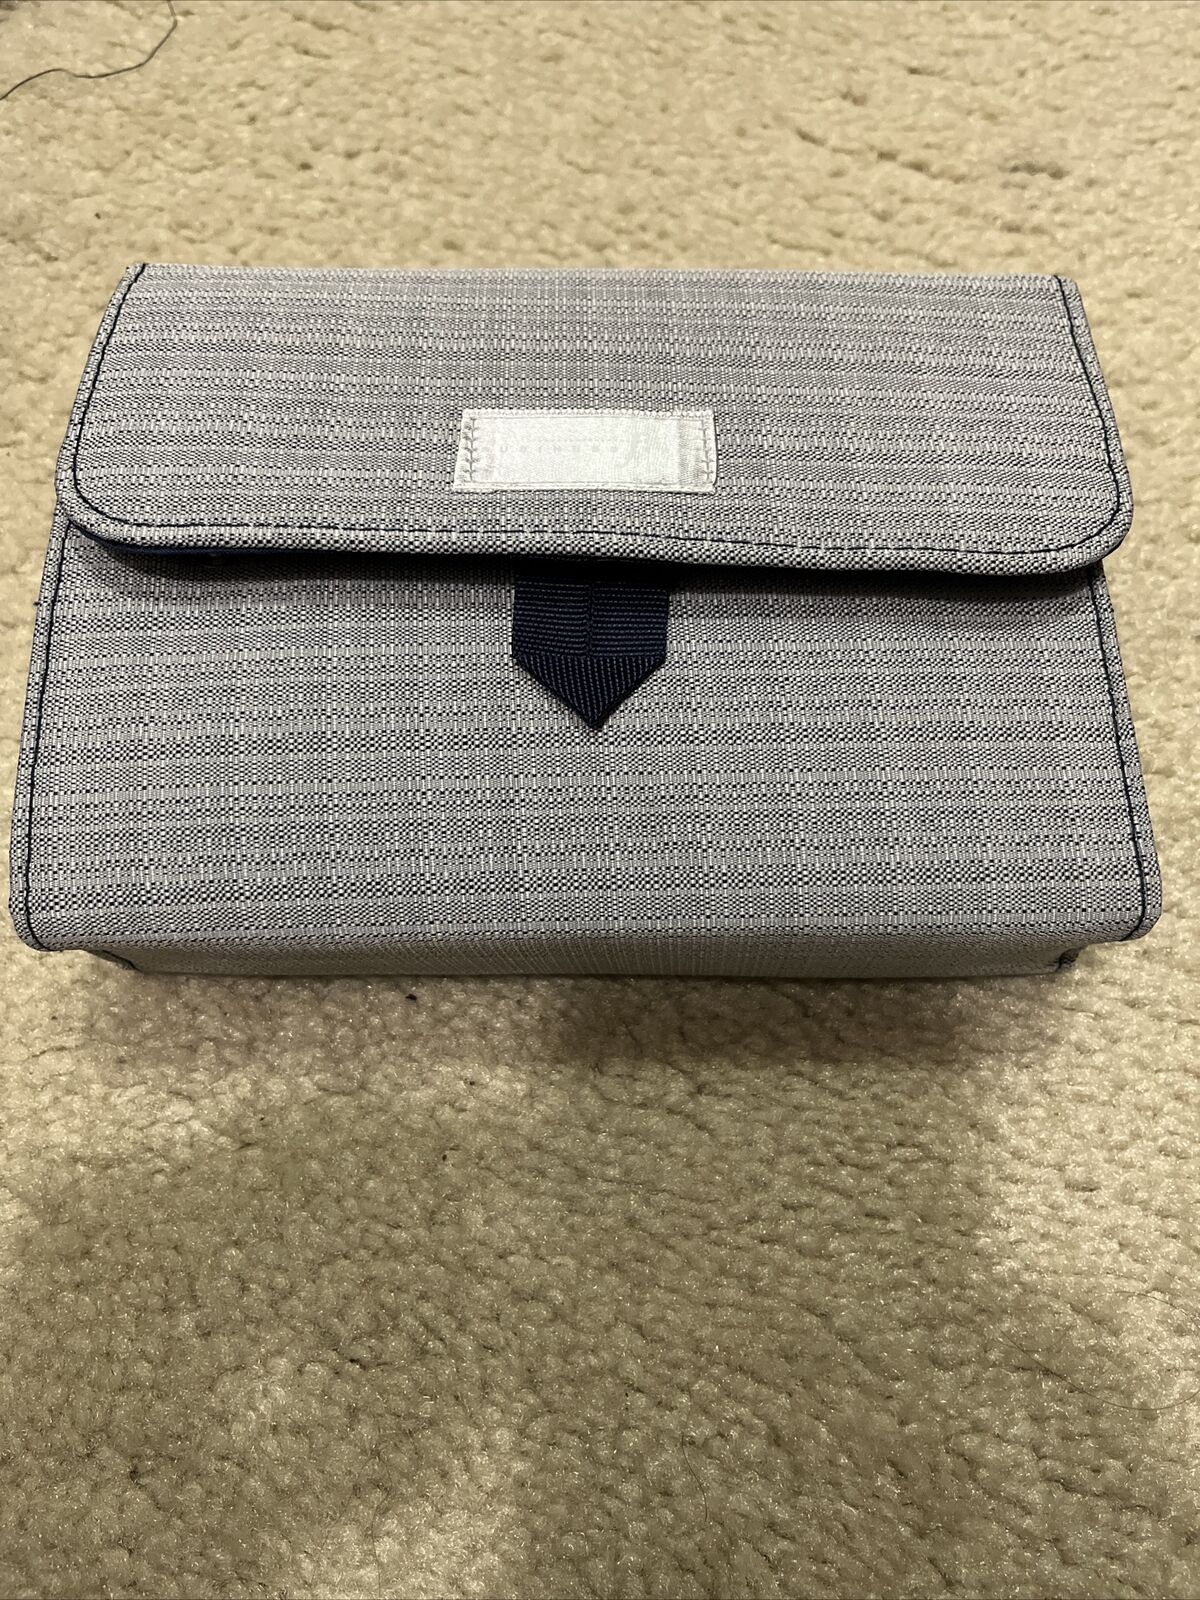 Continental Airlines NEW  SkyTeam Business First Class Amenity Kit Bag.